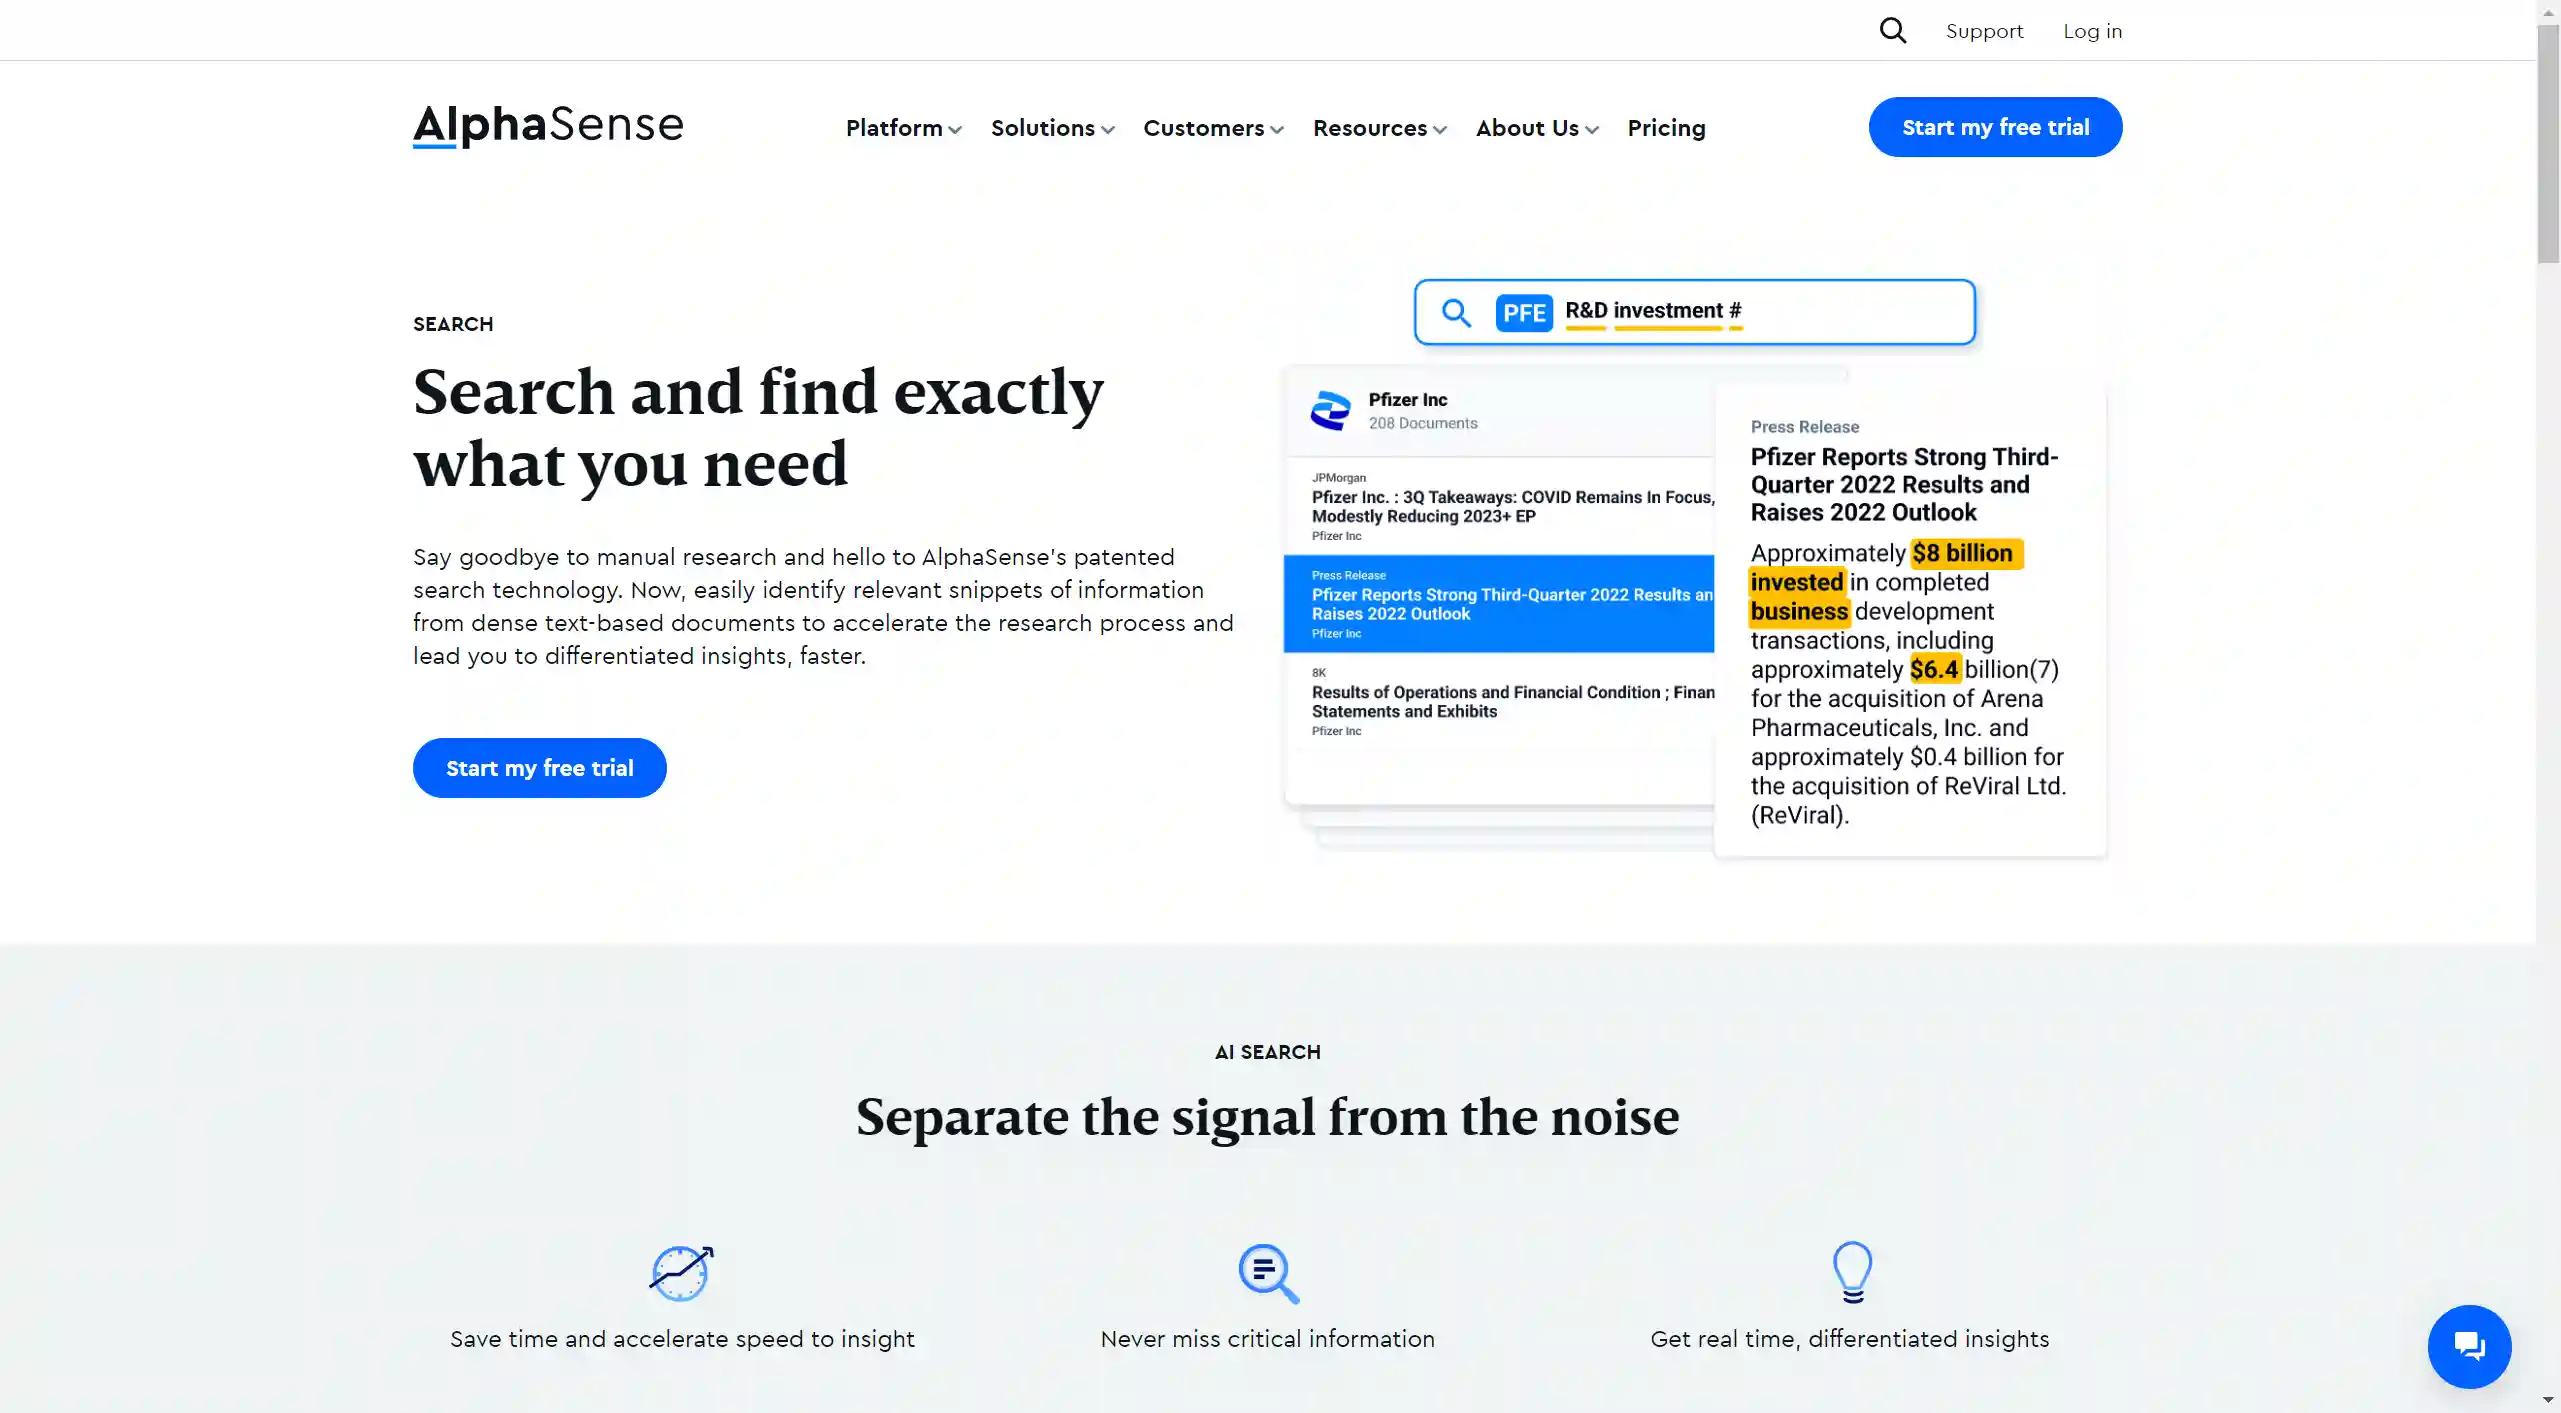 AlphaSense's AI search feature that explains how we well it works with a visual and text next to it